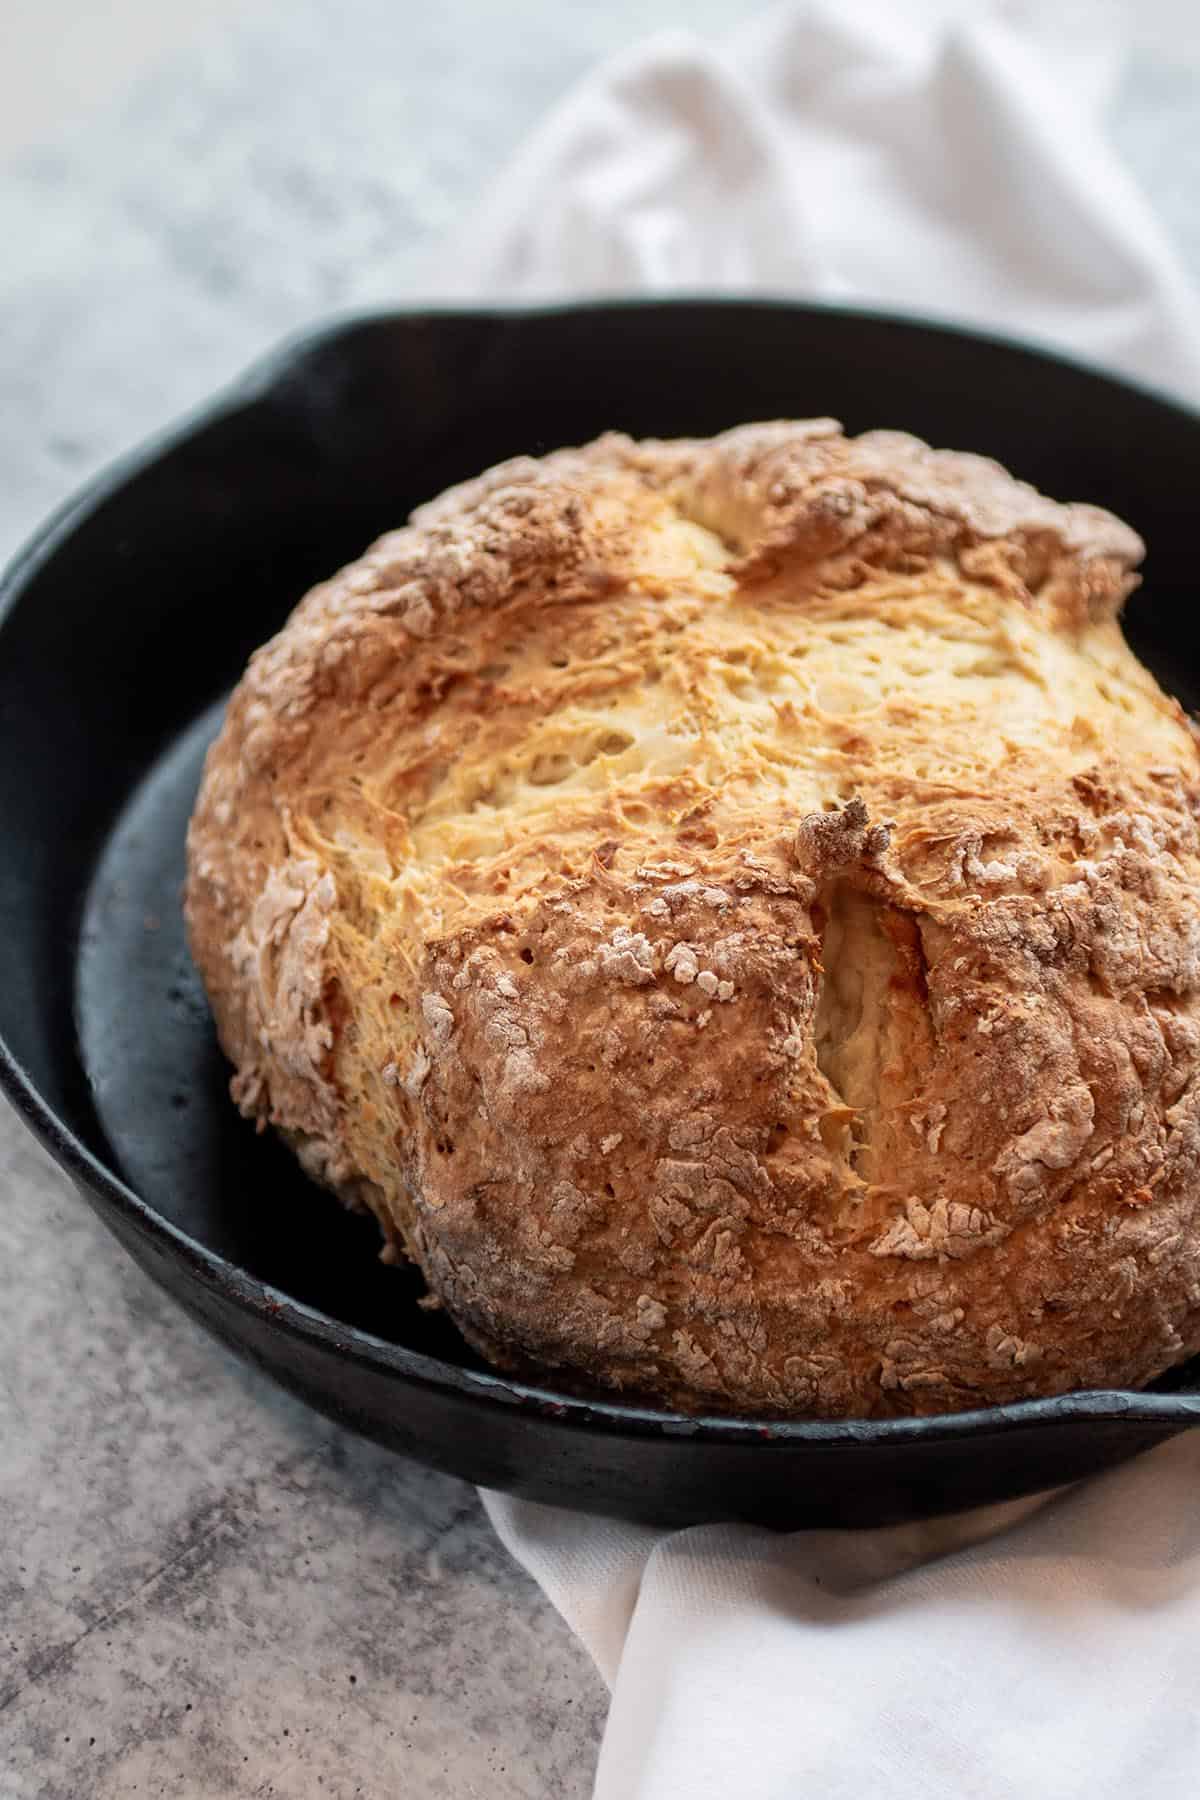 A freshly baked loaf of Irish Soda Bread in a cast iron skillet